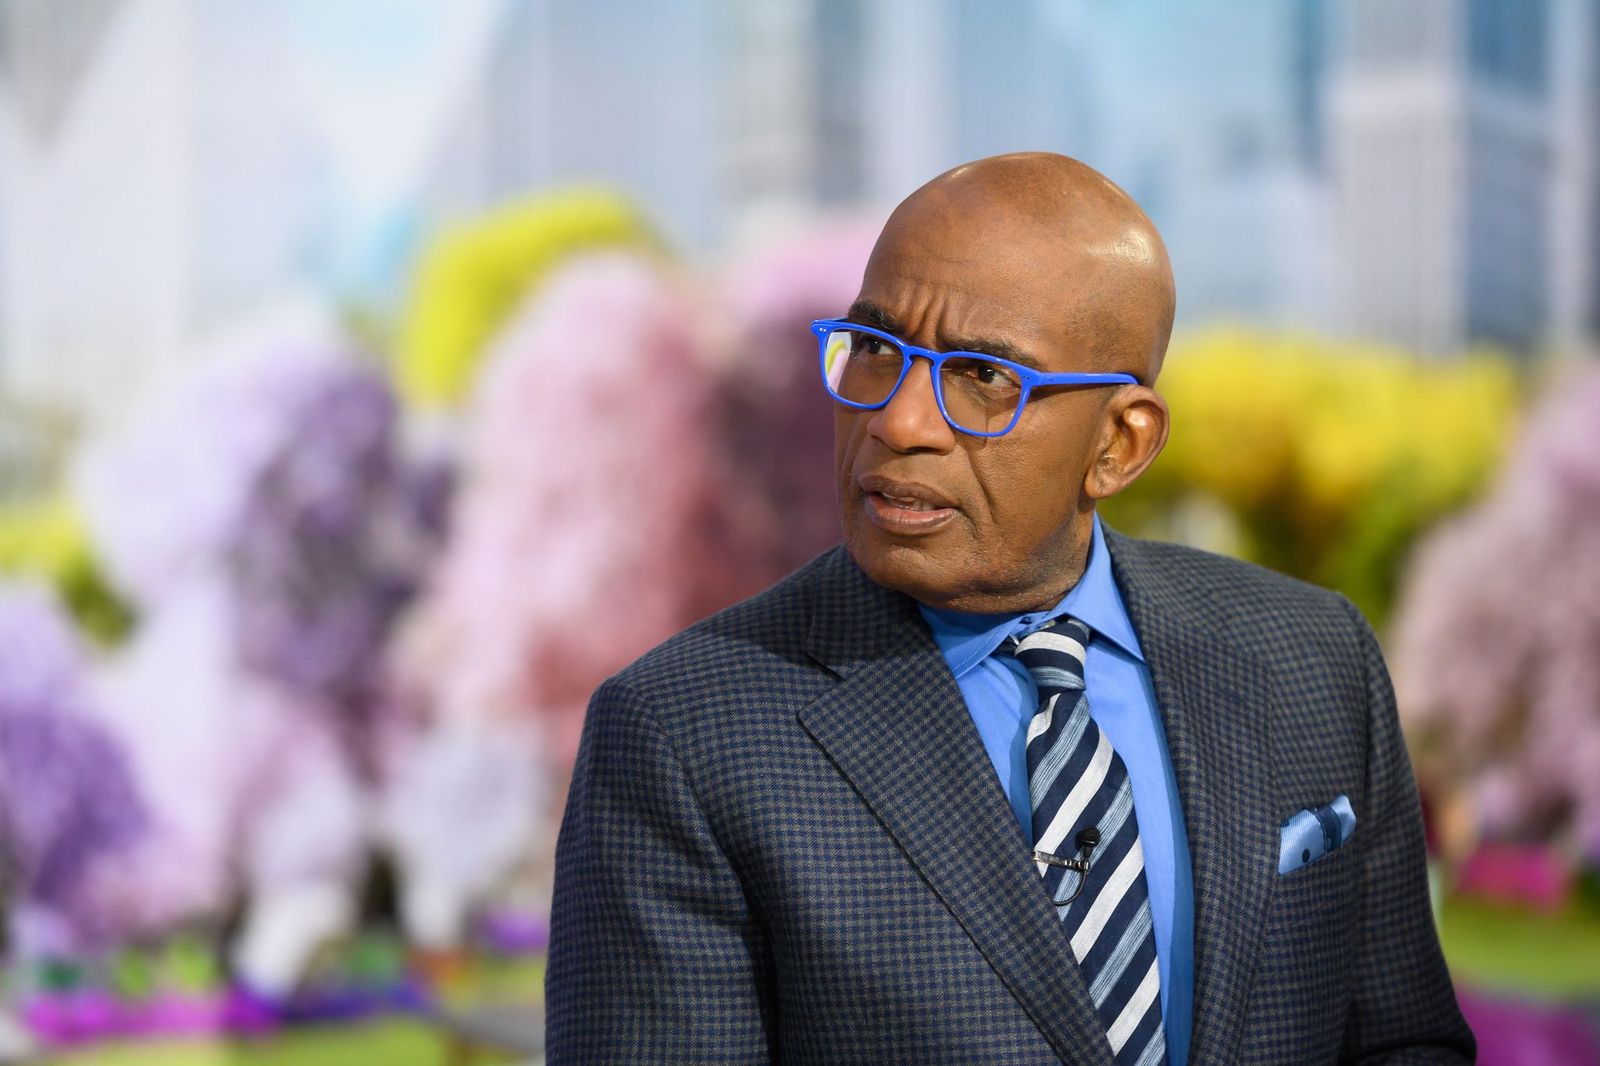 Al Roker on the "Today" show on March 27, 2019 | Photo: Getty Images 